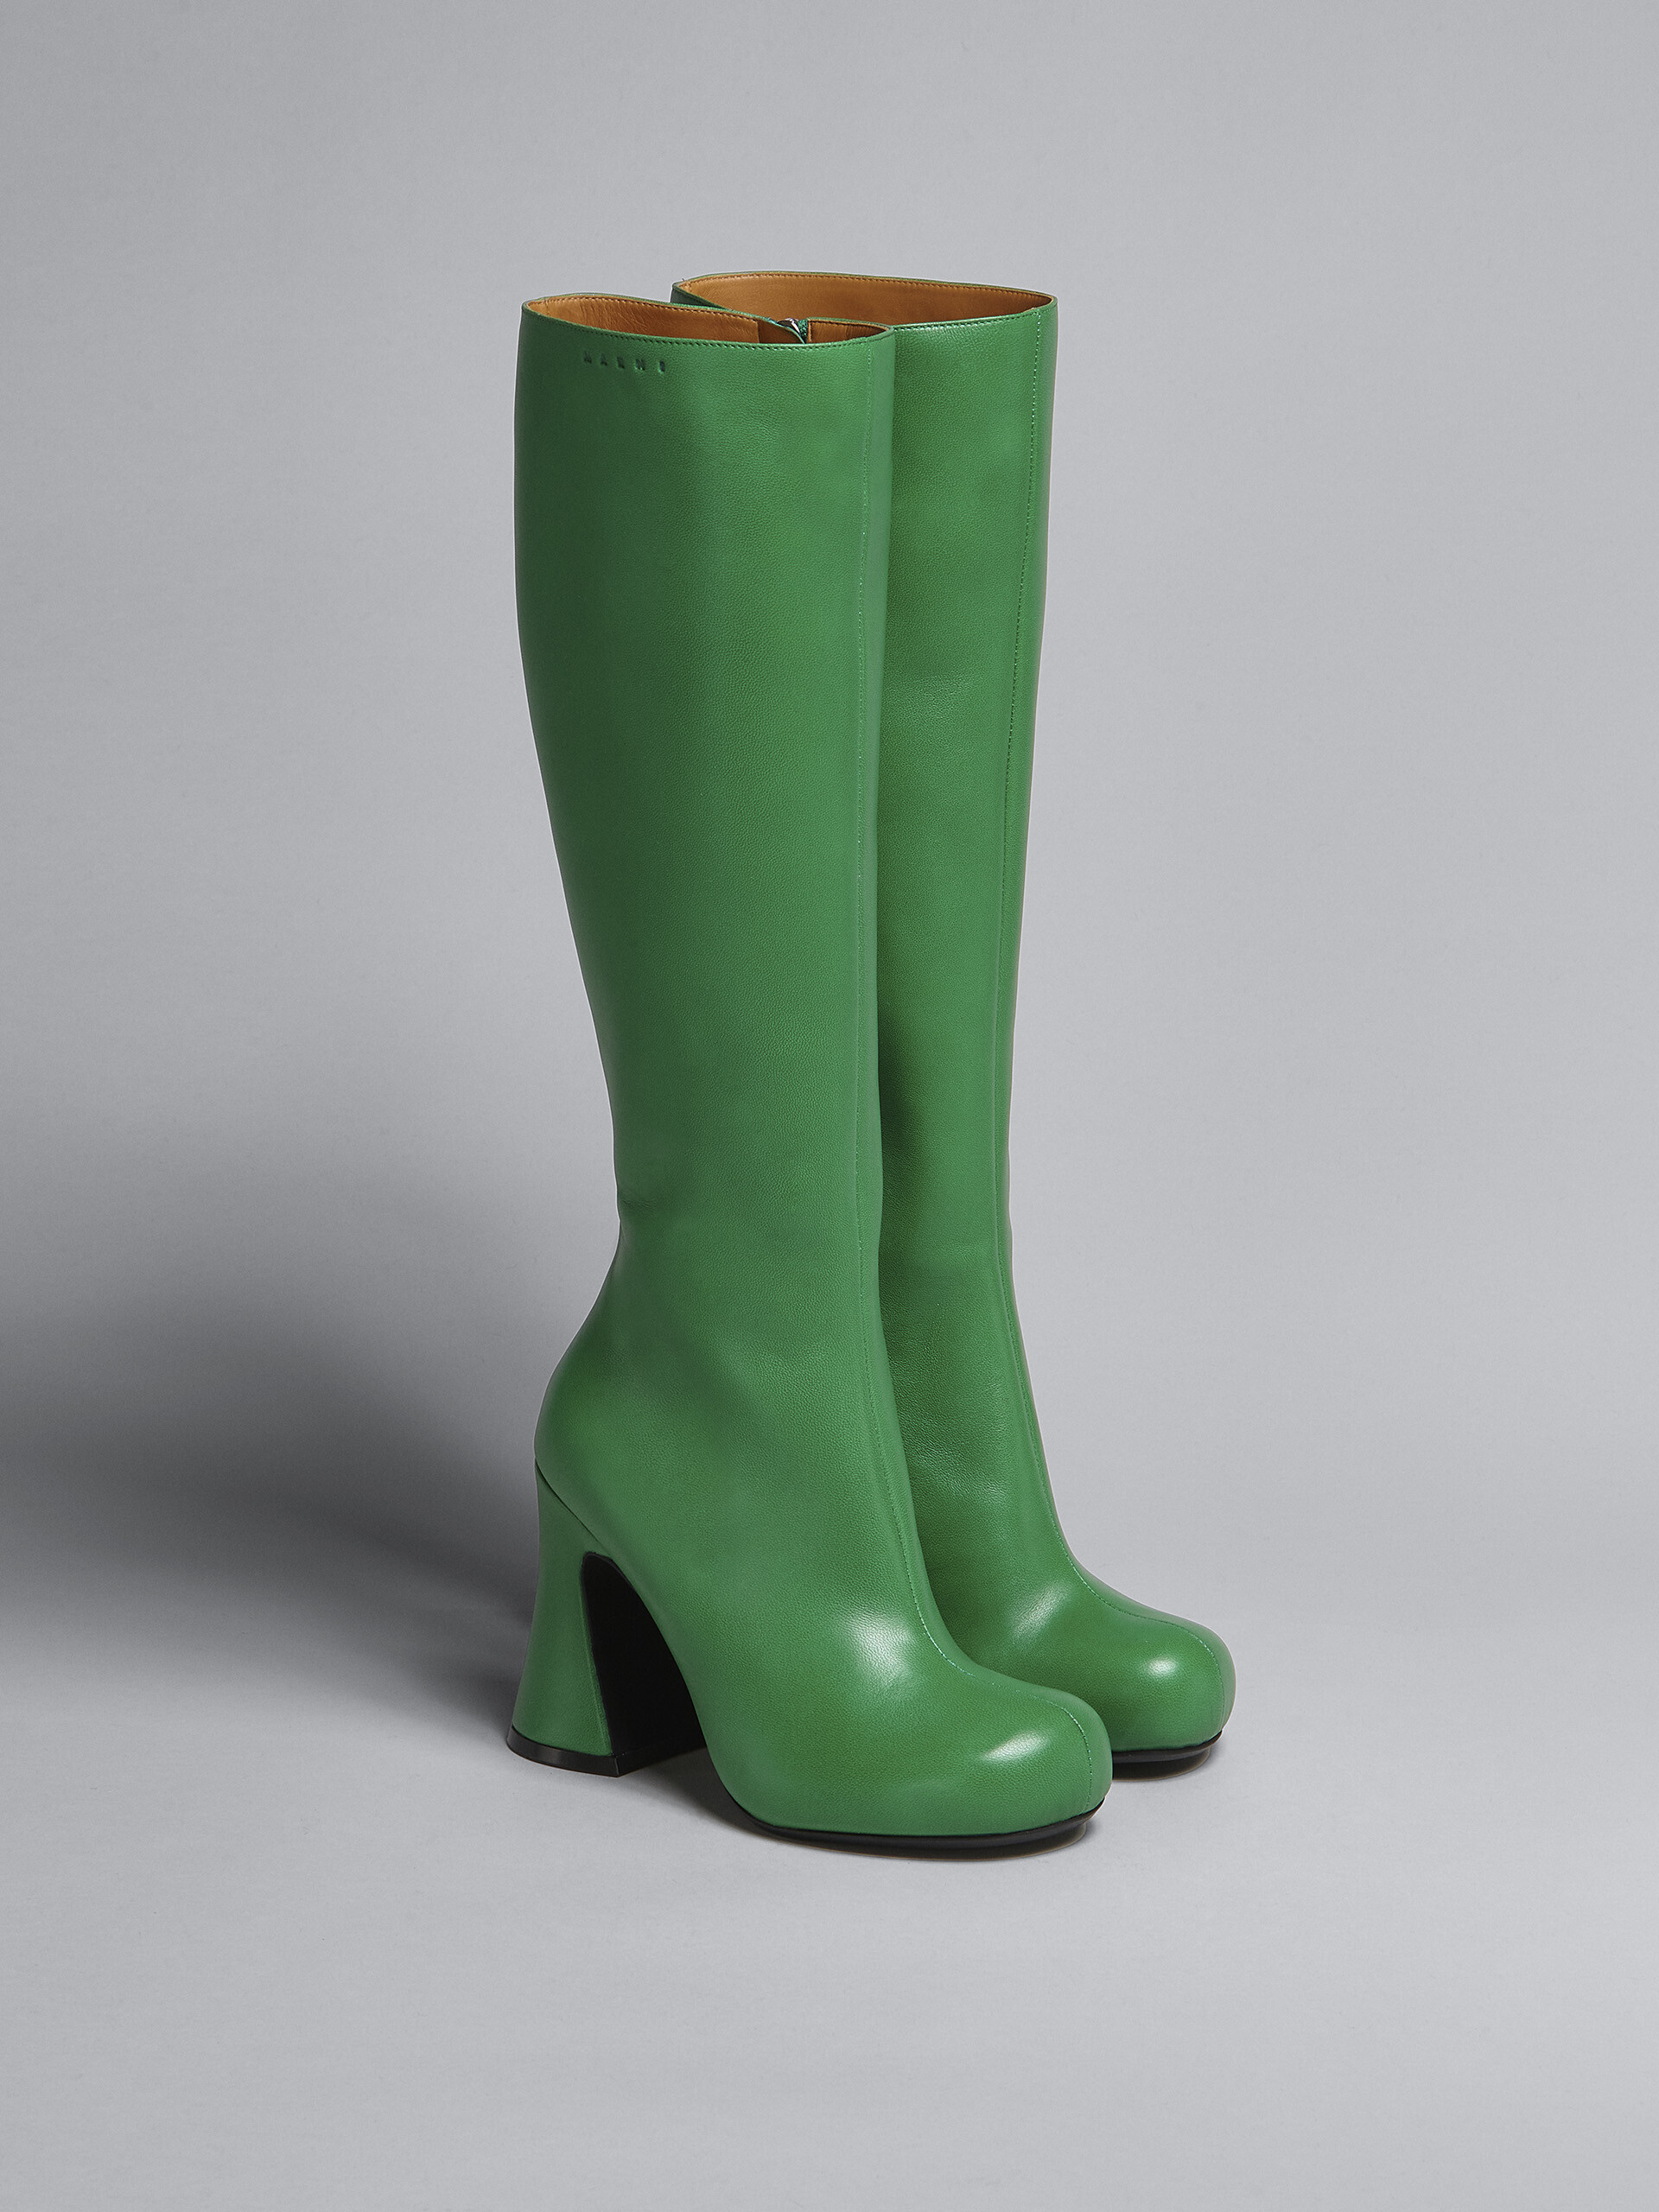 Green leather boot - Boots - Image 2